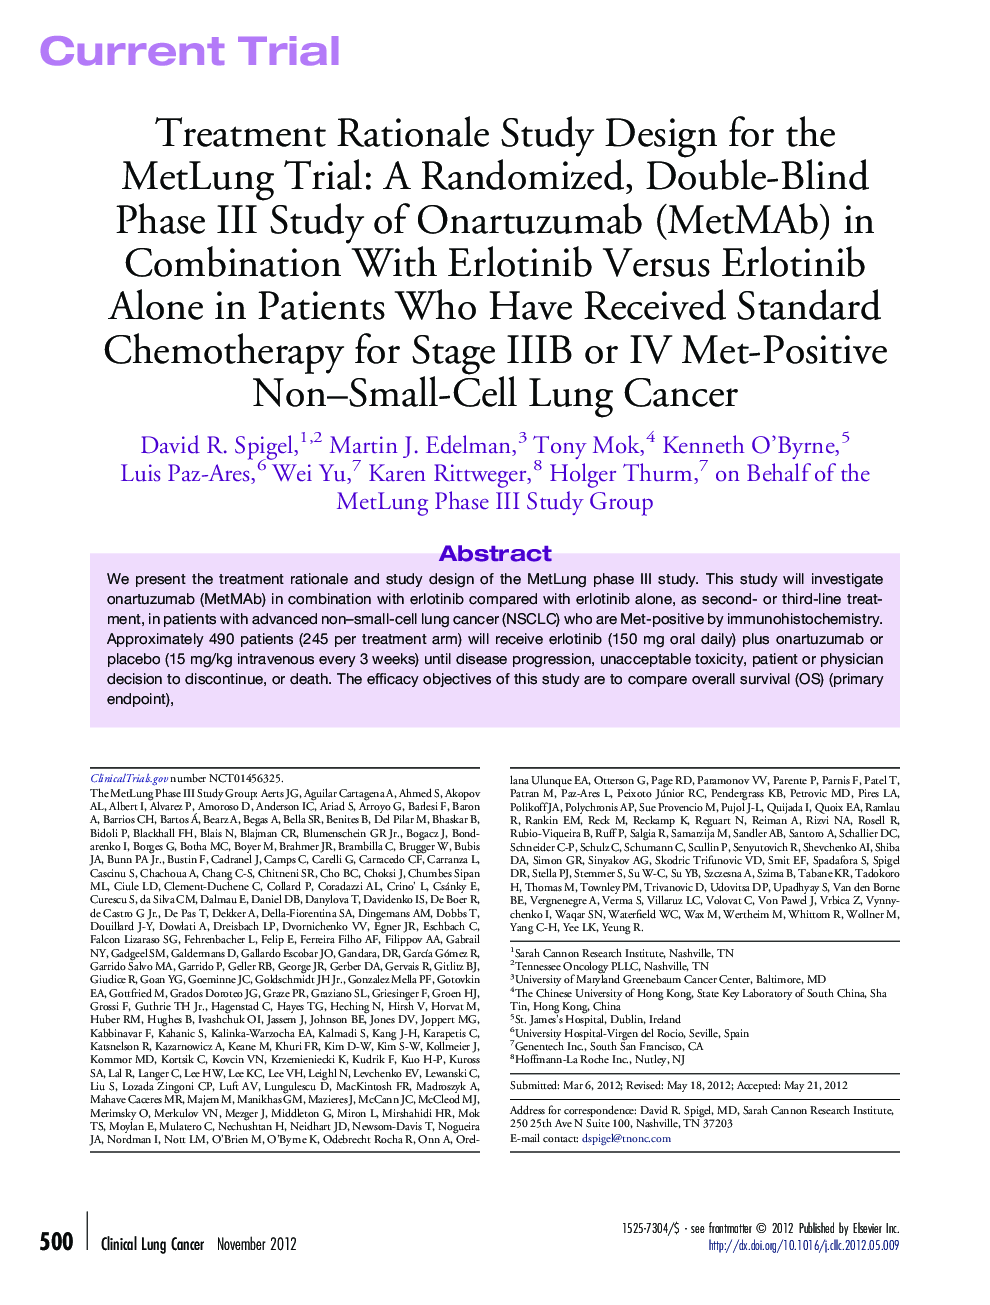 Treatment Rationale Study Design for the MetLung Trial: A Randomized, Double-Blind Phase III Study of Onartuzumab (MetMAb) in Combination With Erlotinib Versus Erlotinib Alone in Patients Who Have Received Standard Chemotherapy for Stage IIIB or IV Met-Po